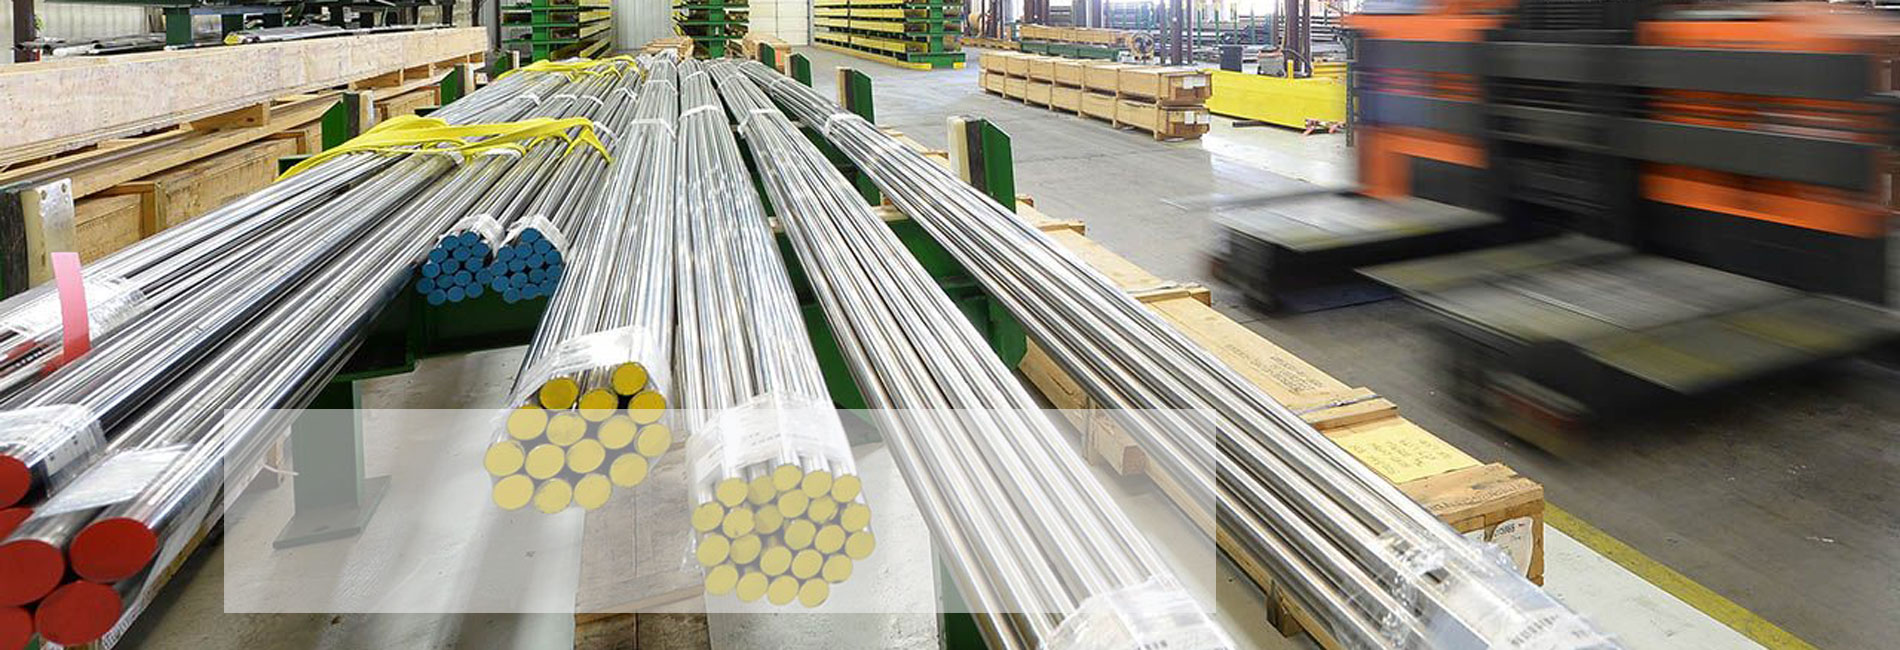 stainless-steel-bar